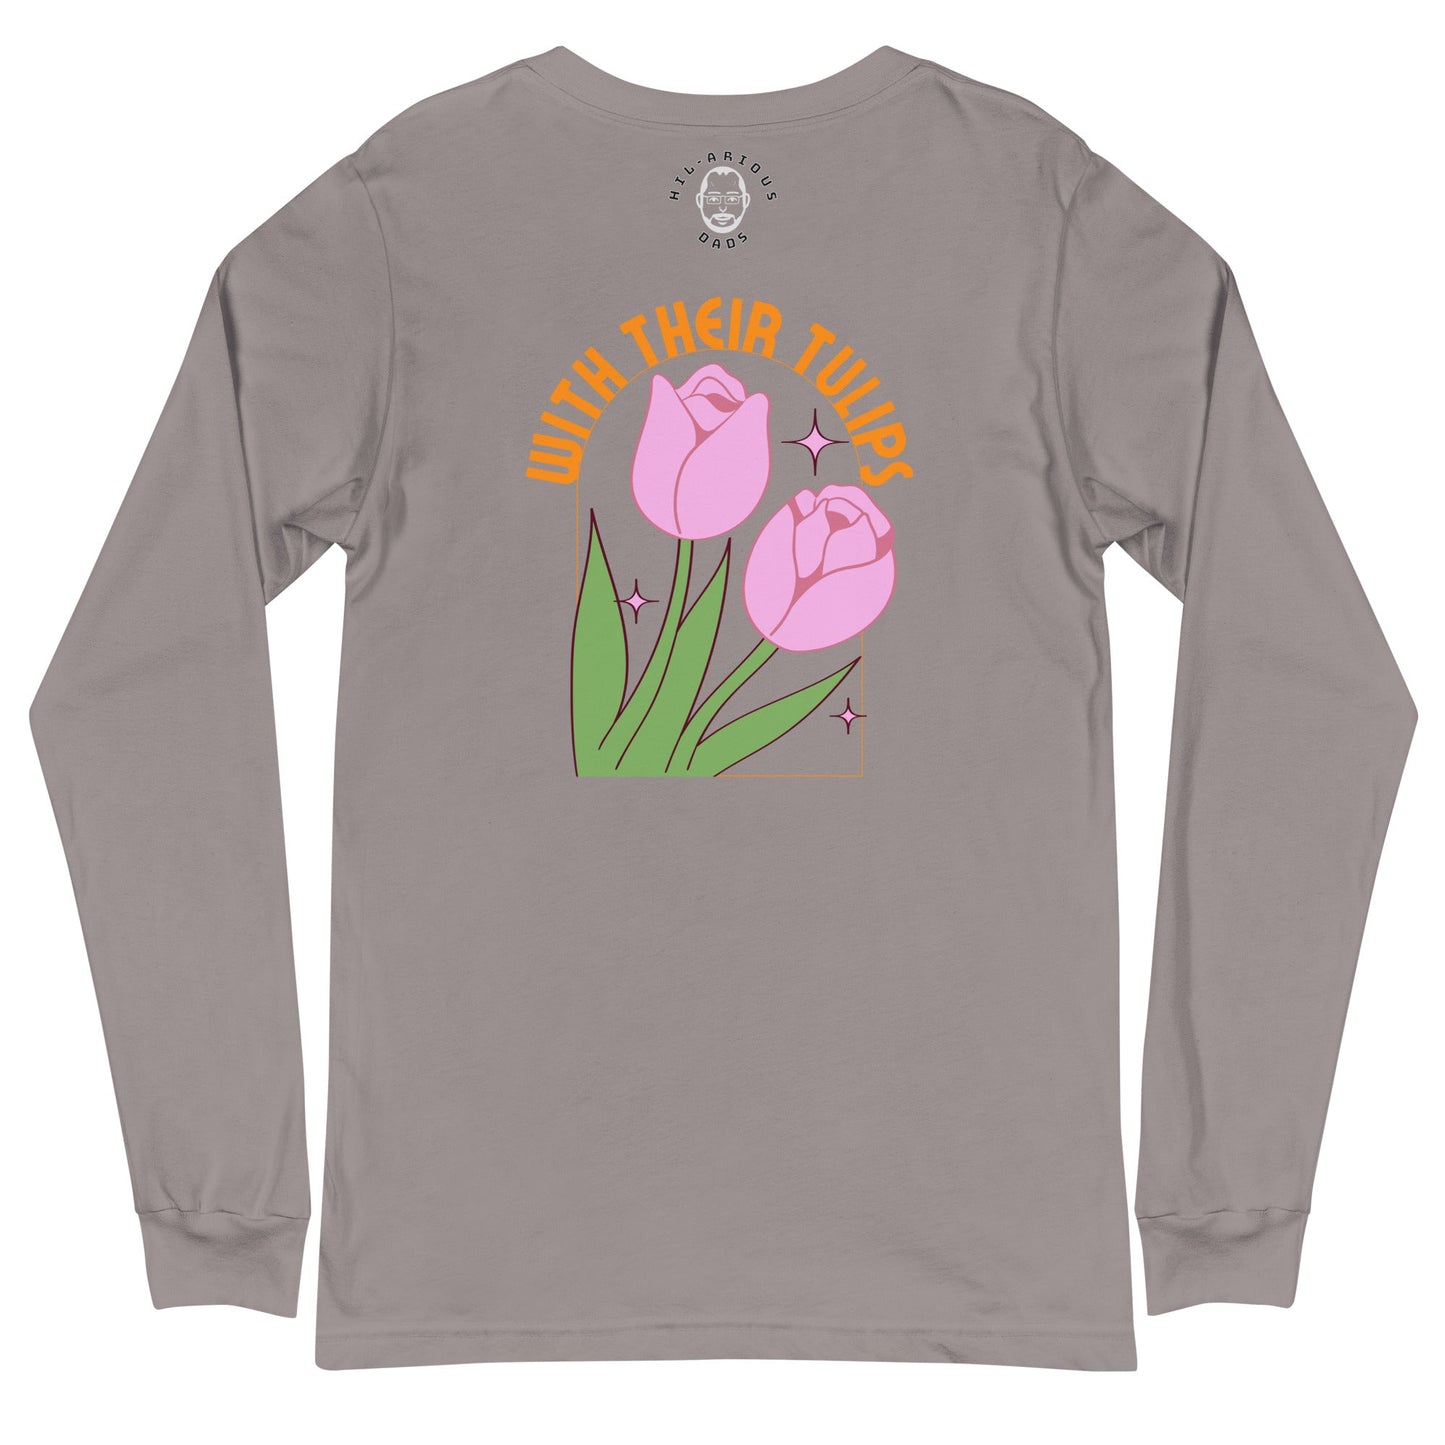 How do April flowers kiss?-Long Sleeve Tee - Hil-arious Dads